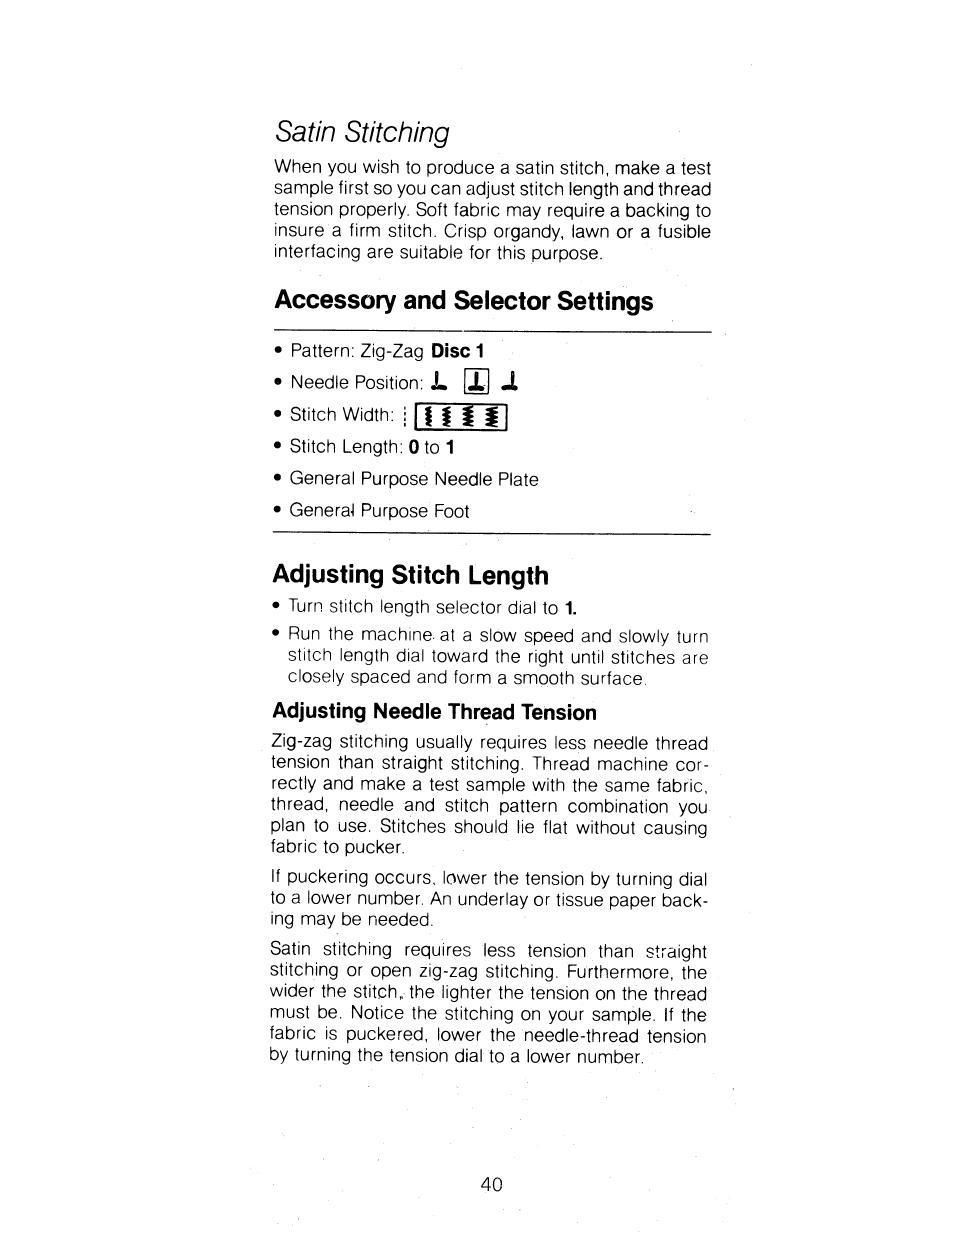 Satin stitching, Accessory and selector settings, Adjusting stitch length | Adjusting needle thread tension, Jl [x | SINGER 1288 User Manual | Page 41 / 89